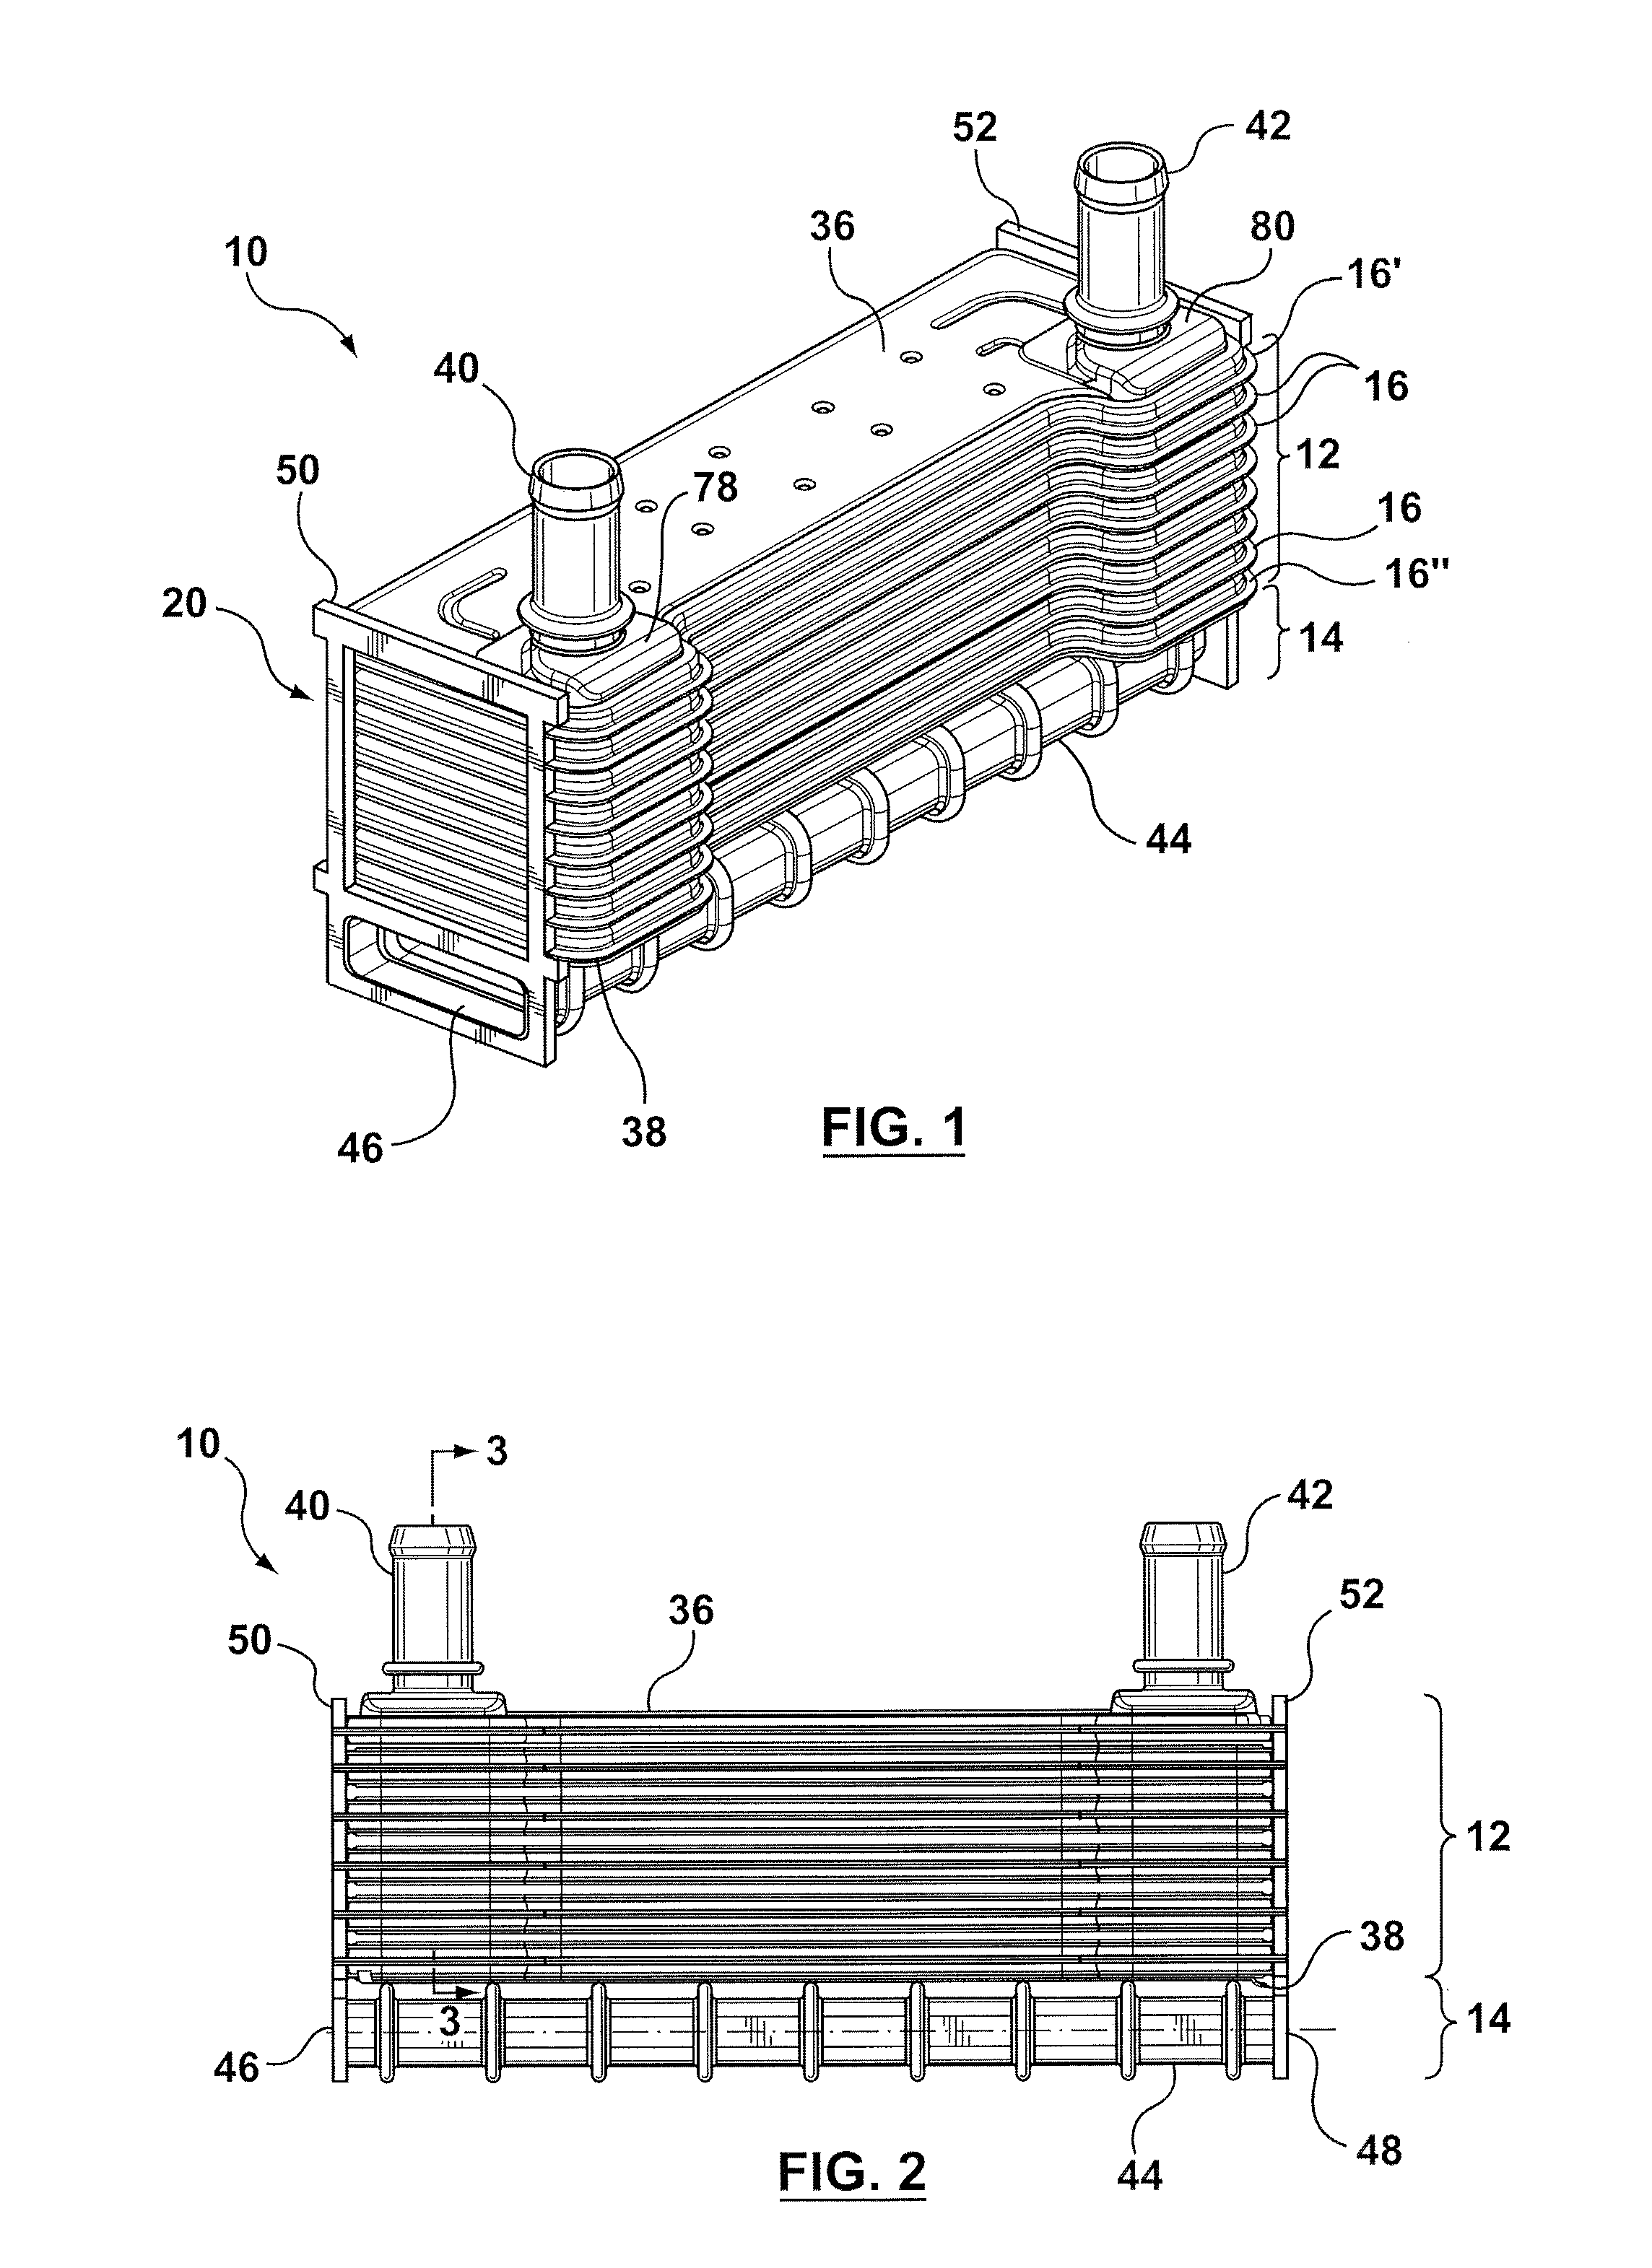 Heat exchanger with bypass